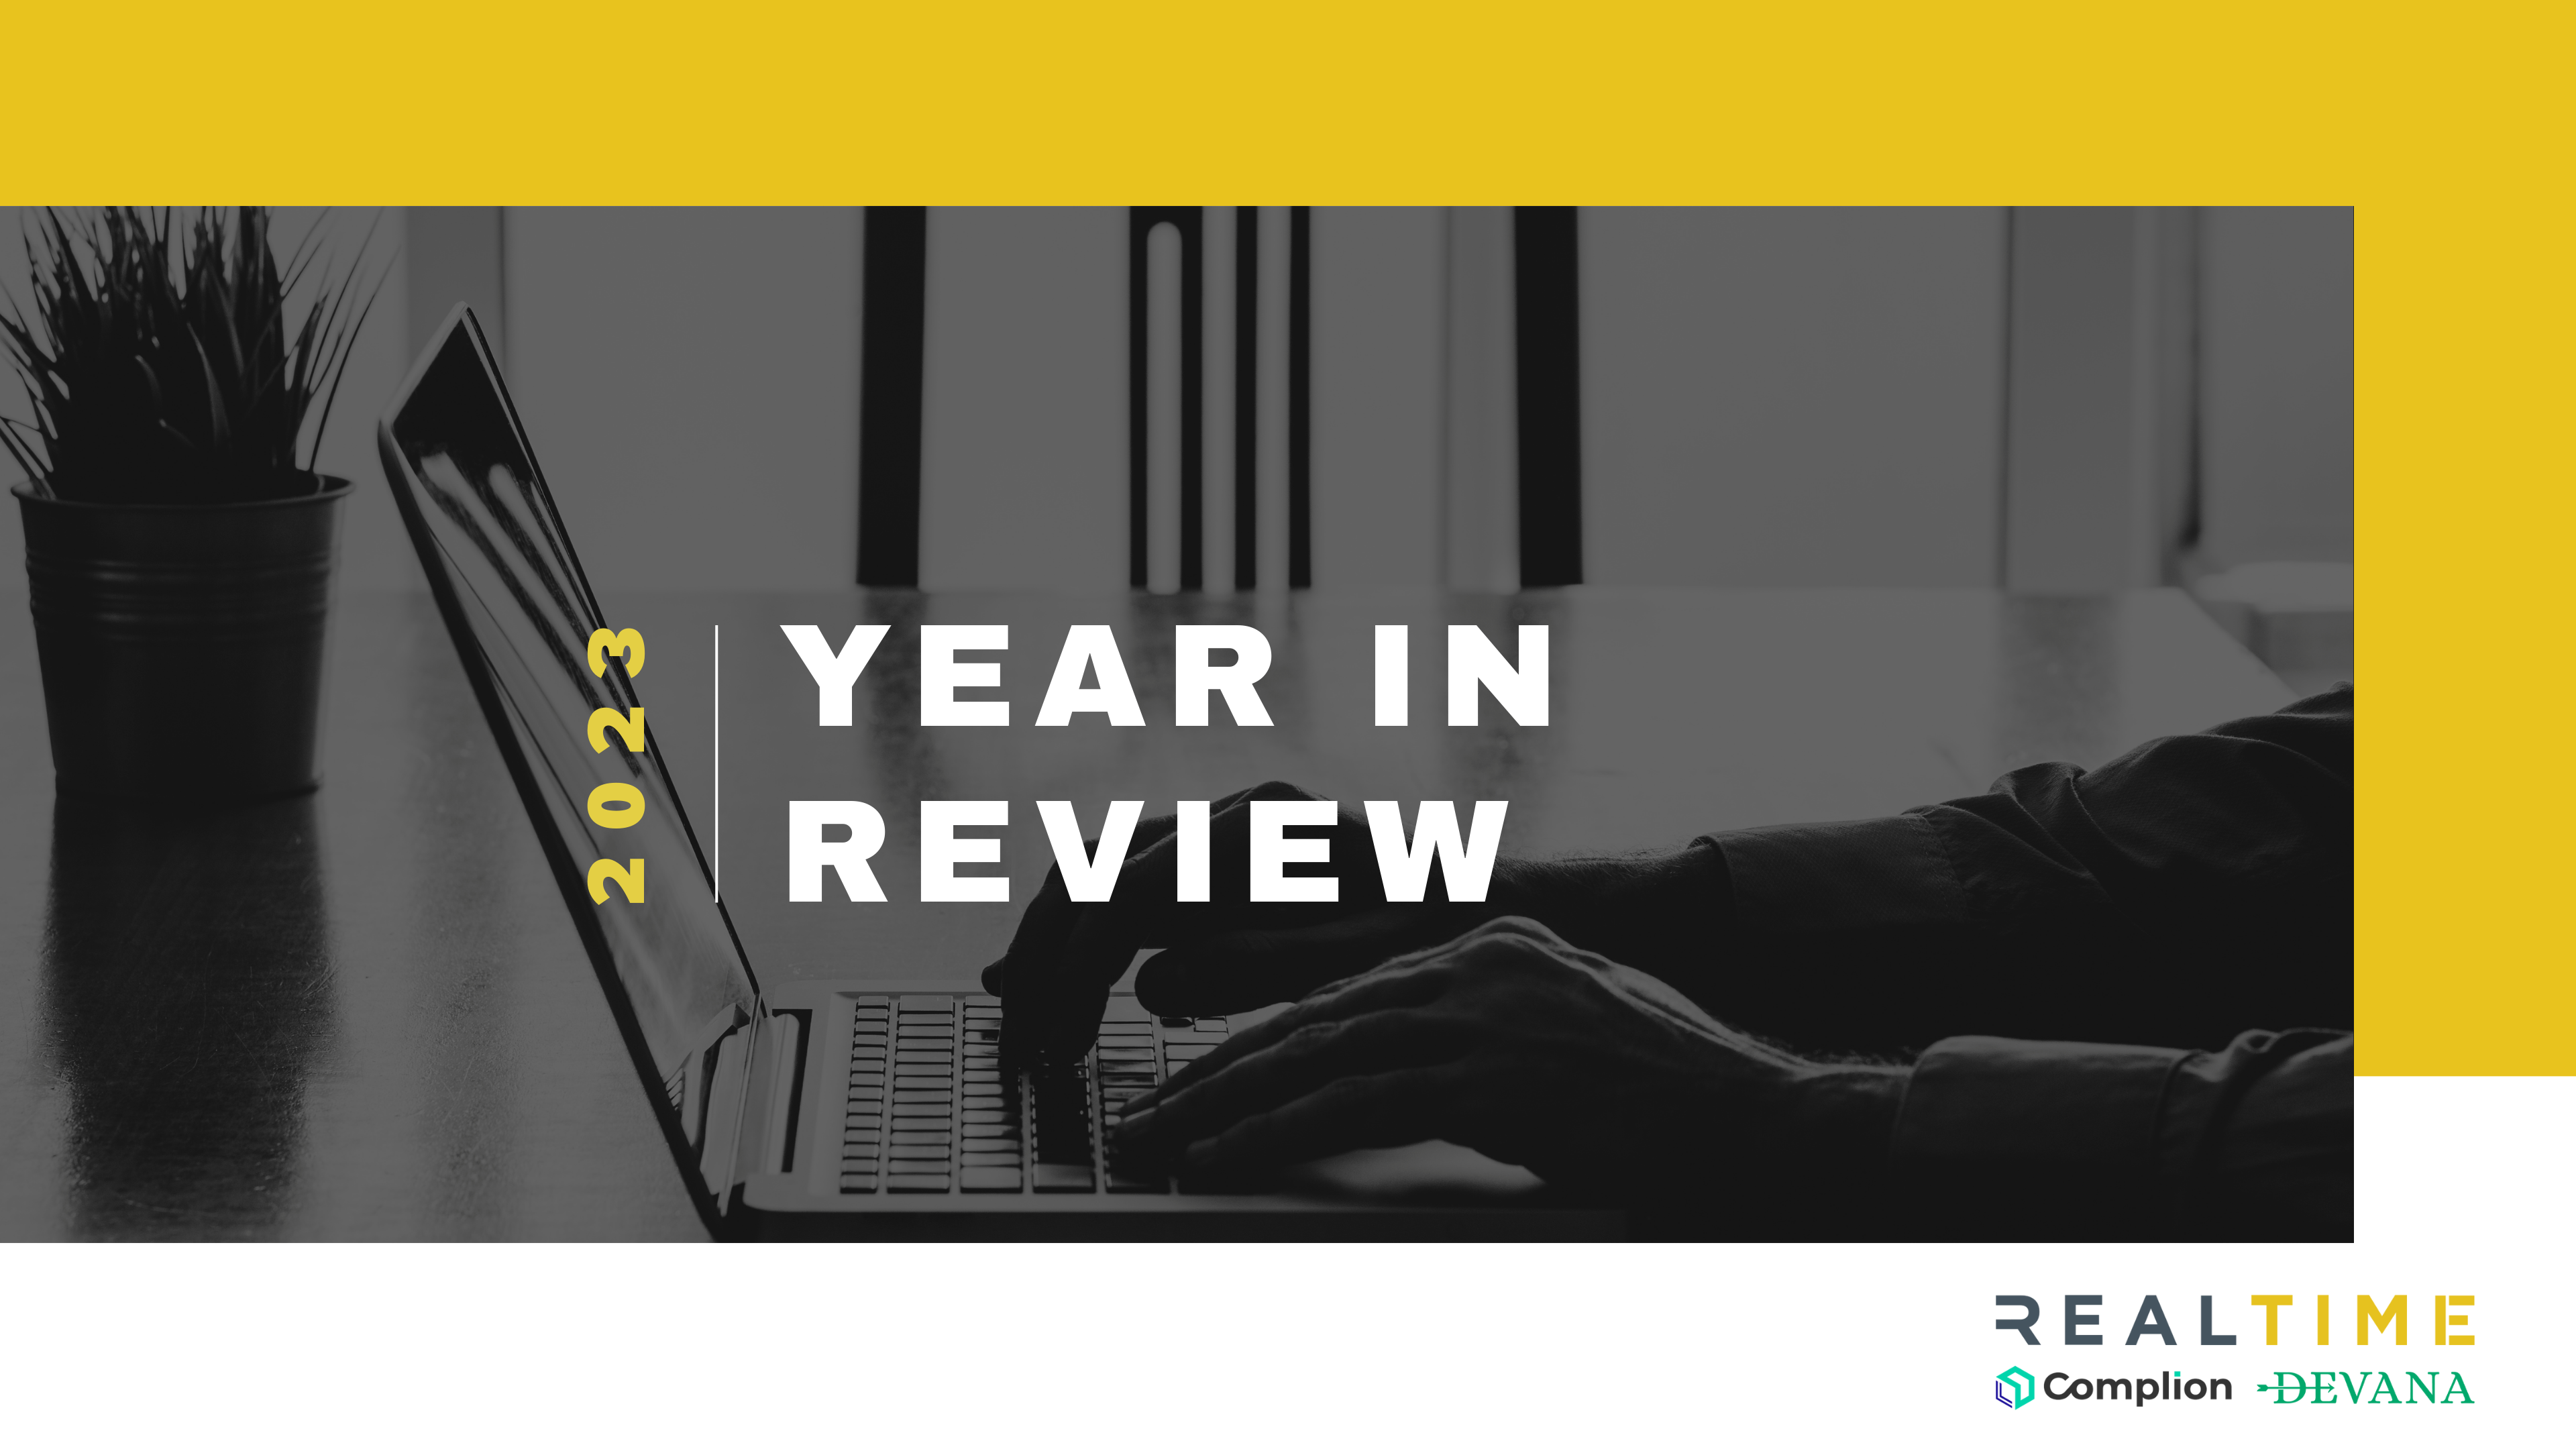 Year in Review, RealTime Software Solutions